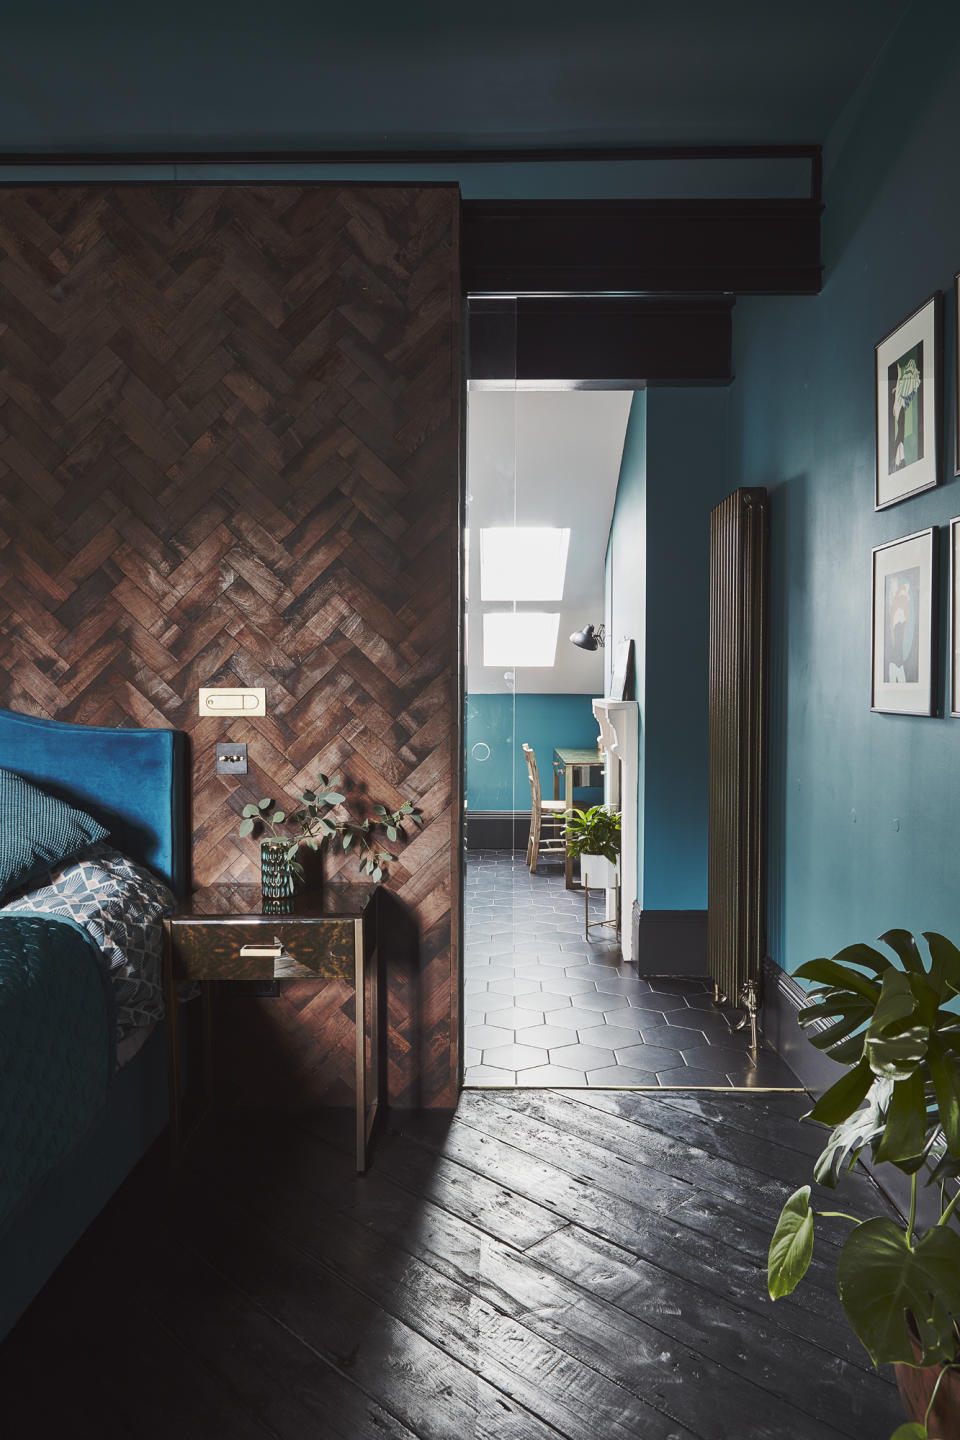 Create atmosphere with a moody feature wall